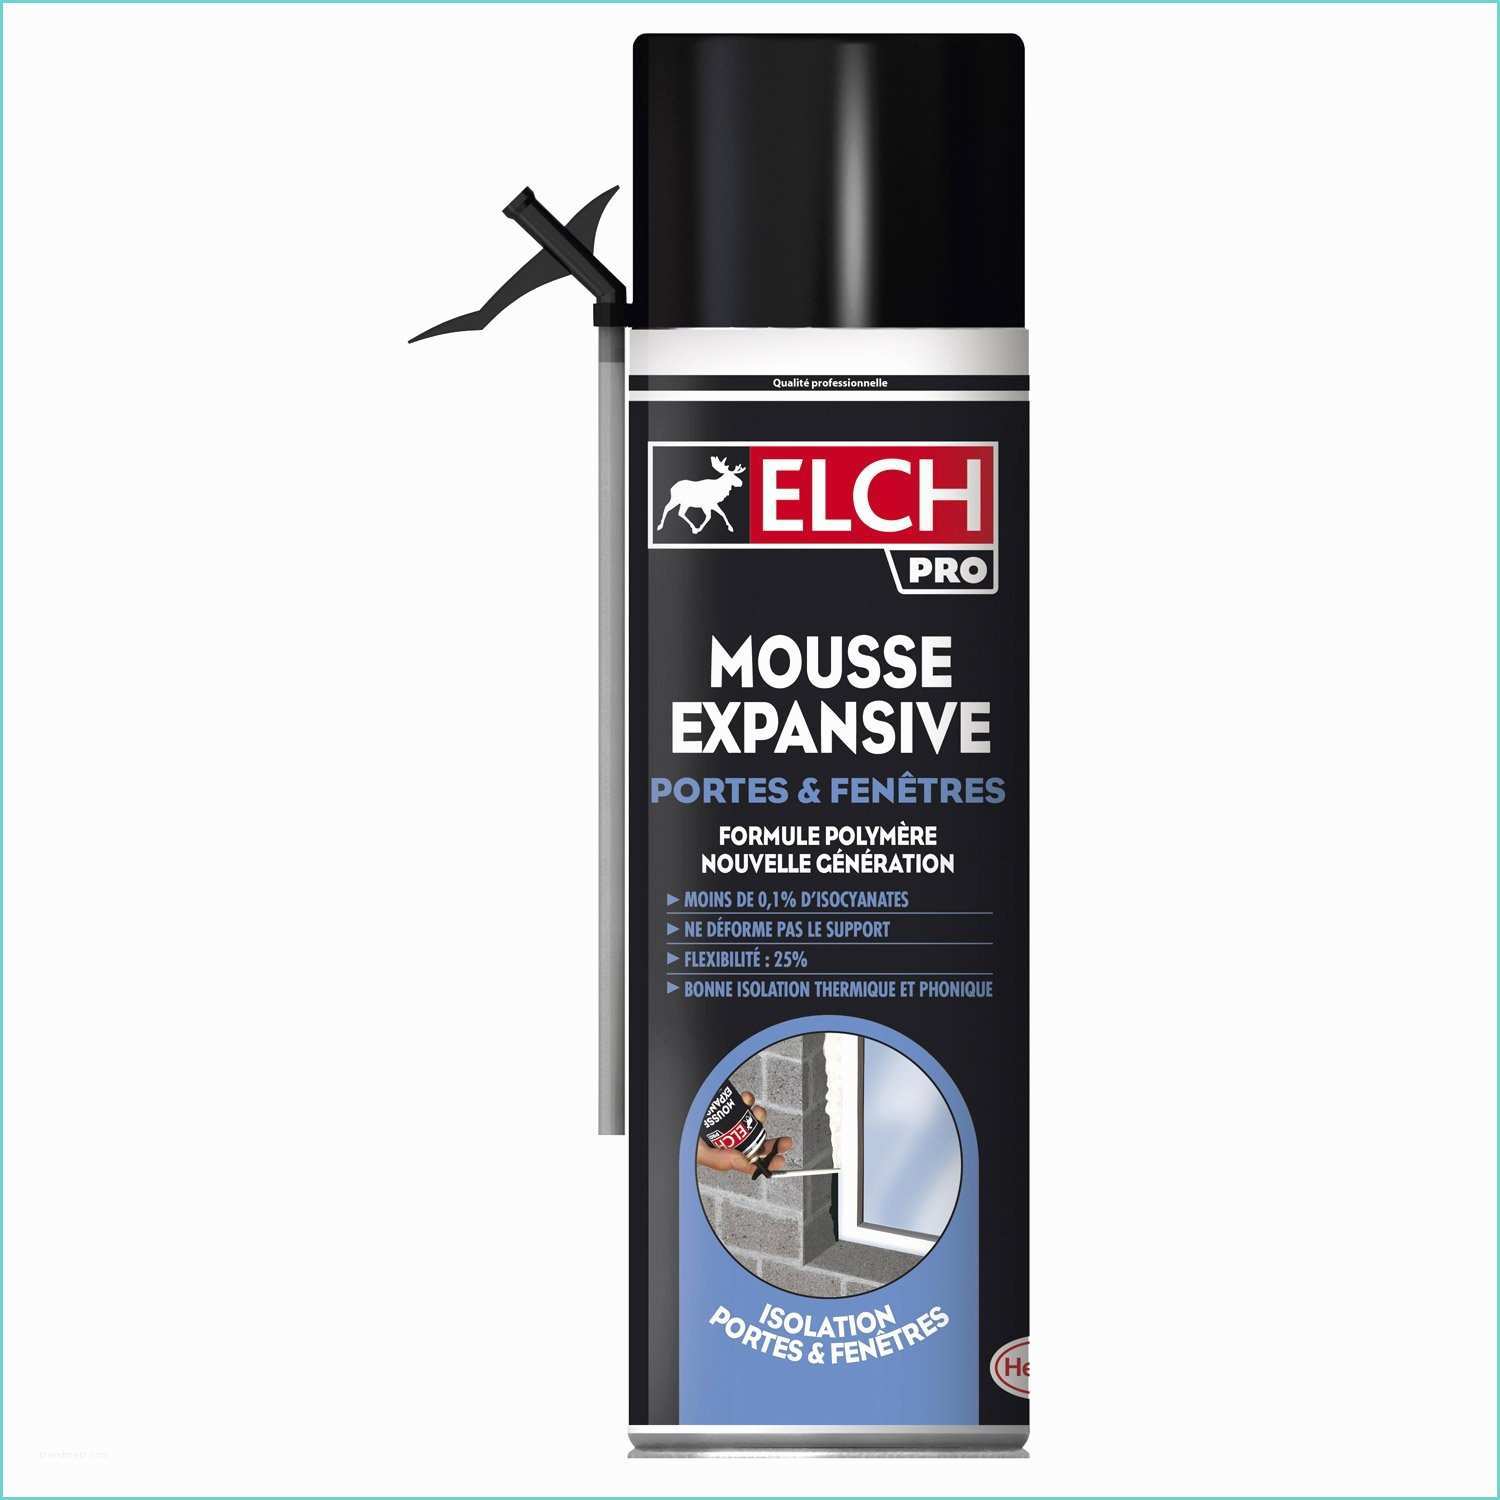 Mousse Expansive Hydrofuge Leroy Merlin Mousse Expansive Power isole Elch 500 Ml